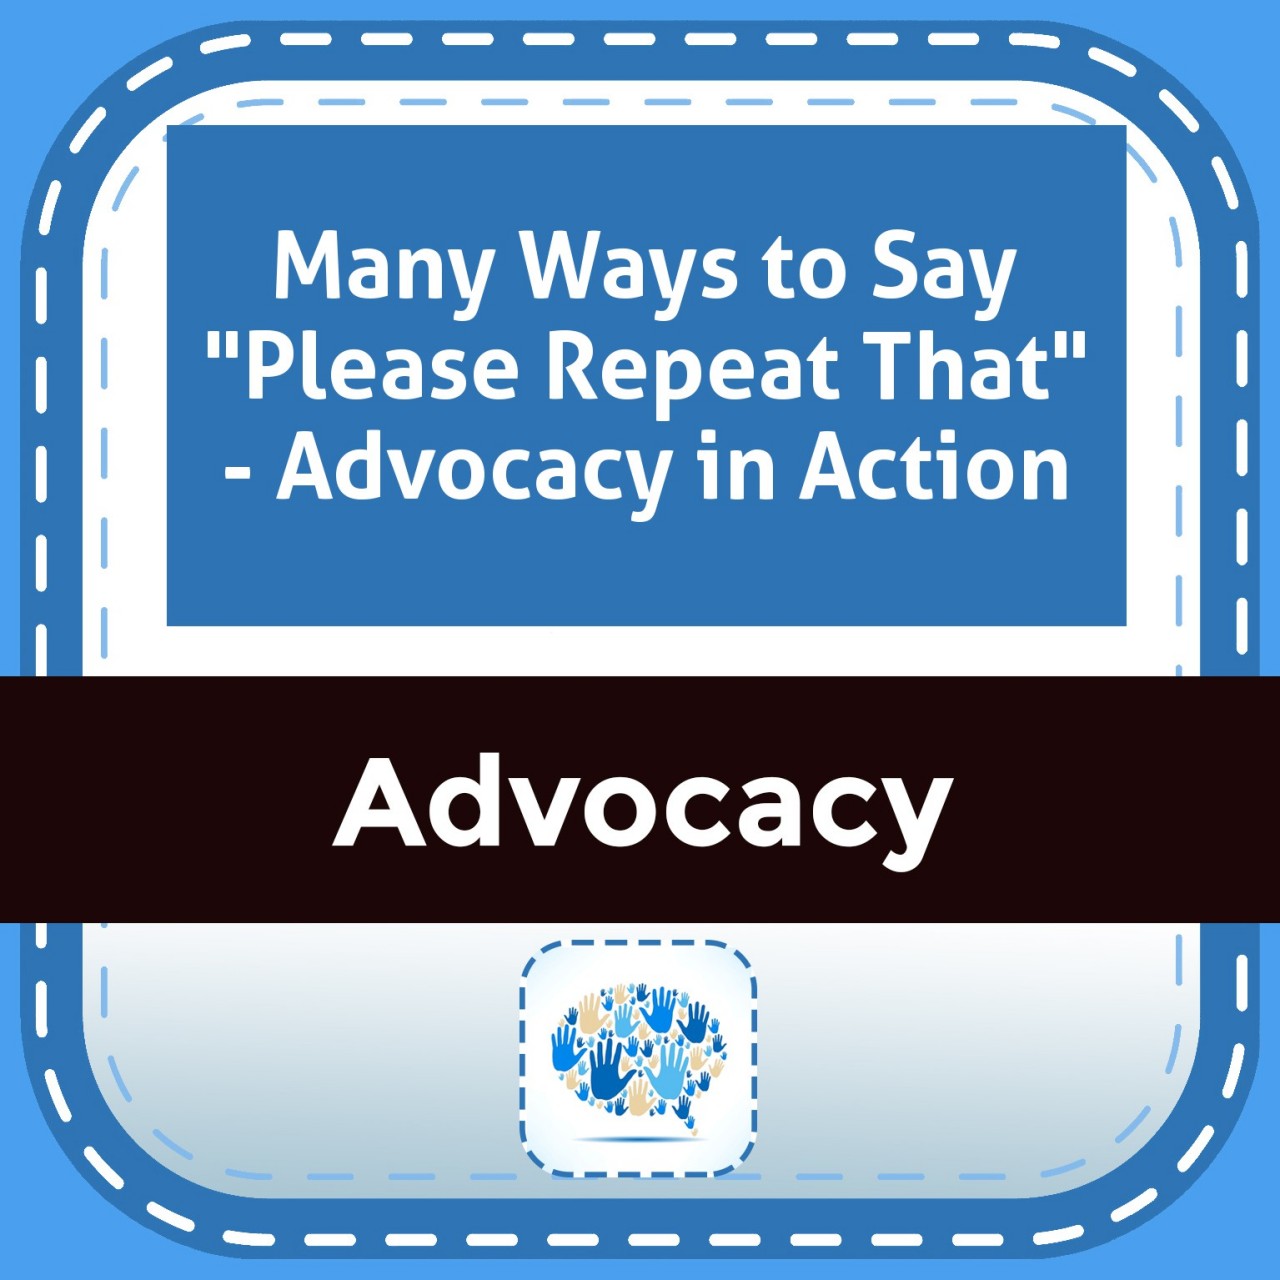 Many Ways to Say "Please Repeat That" - Advocacy in Action